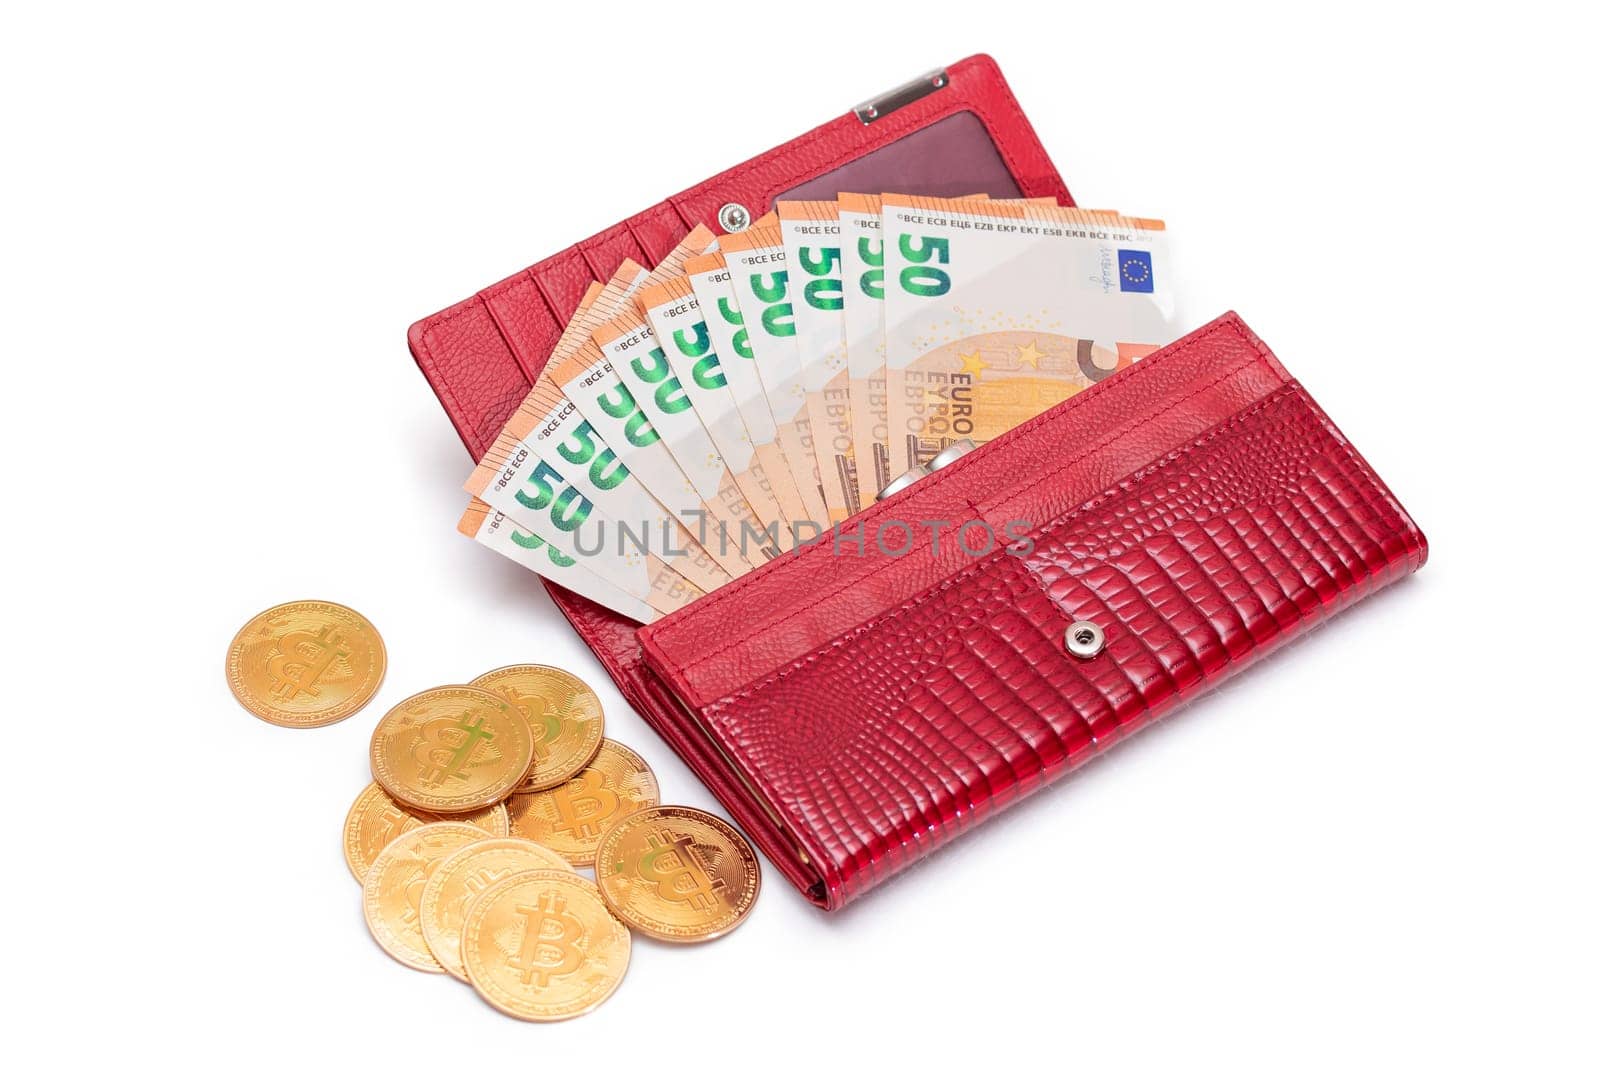 Opened Red Women Purse with 50 Euro Banknotes Inside and Bitcoin Coins - Isolated on White Background. A Wallet Full of Money Symbolizing Wealth, Success, Shopping and Social Status - Isolation